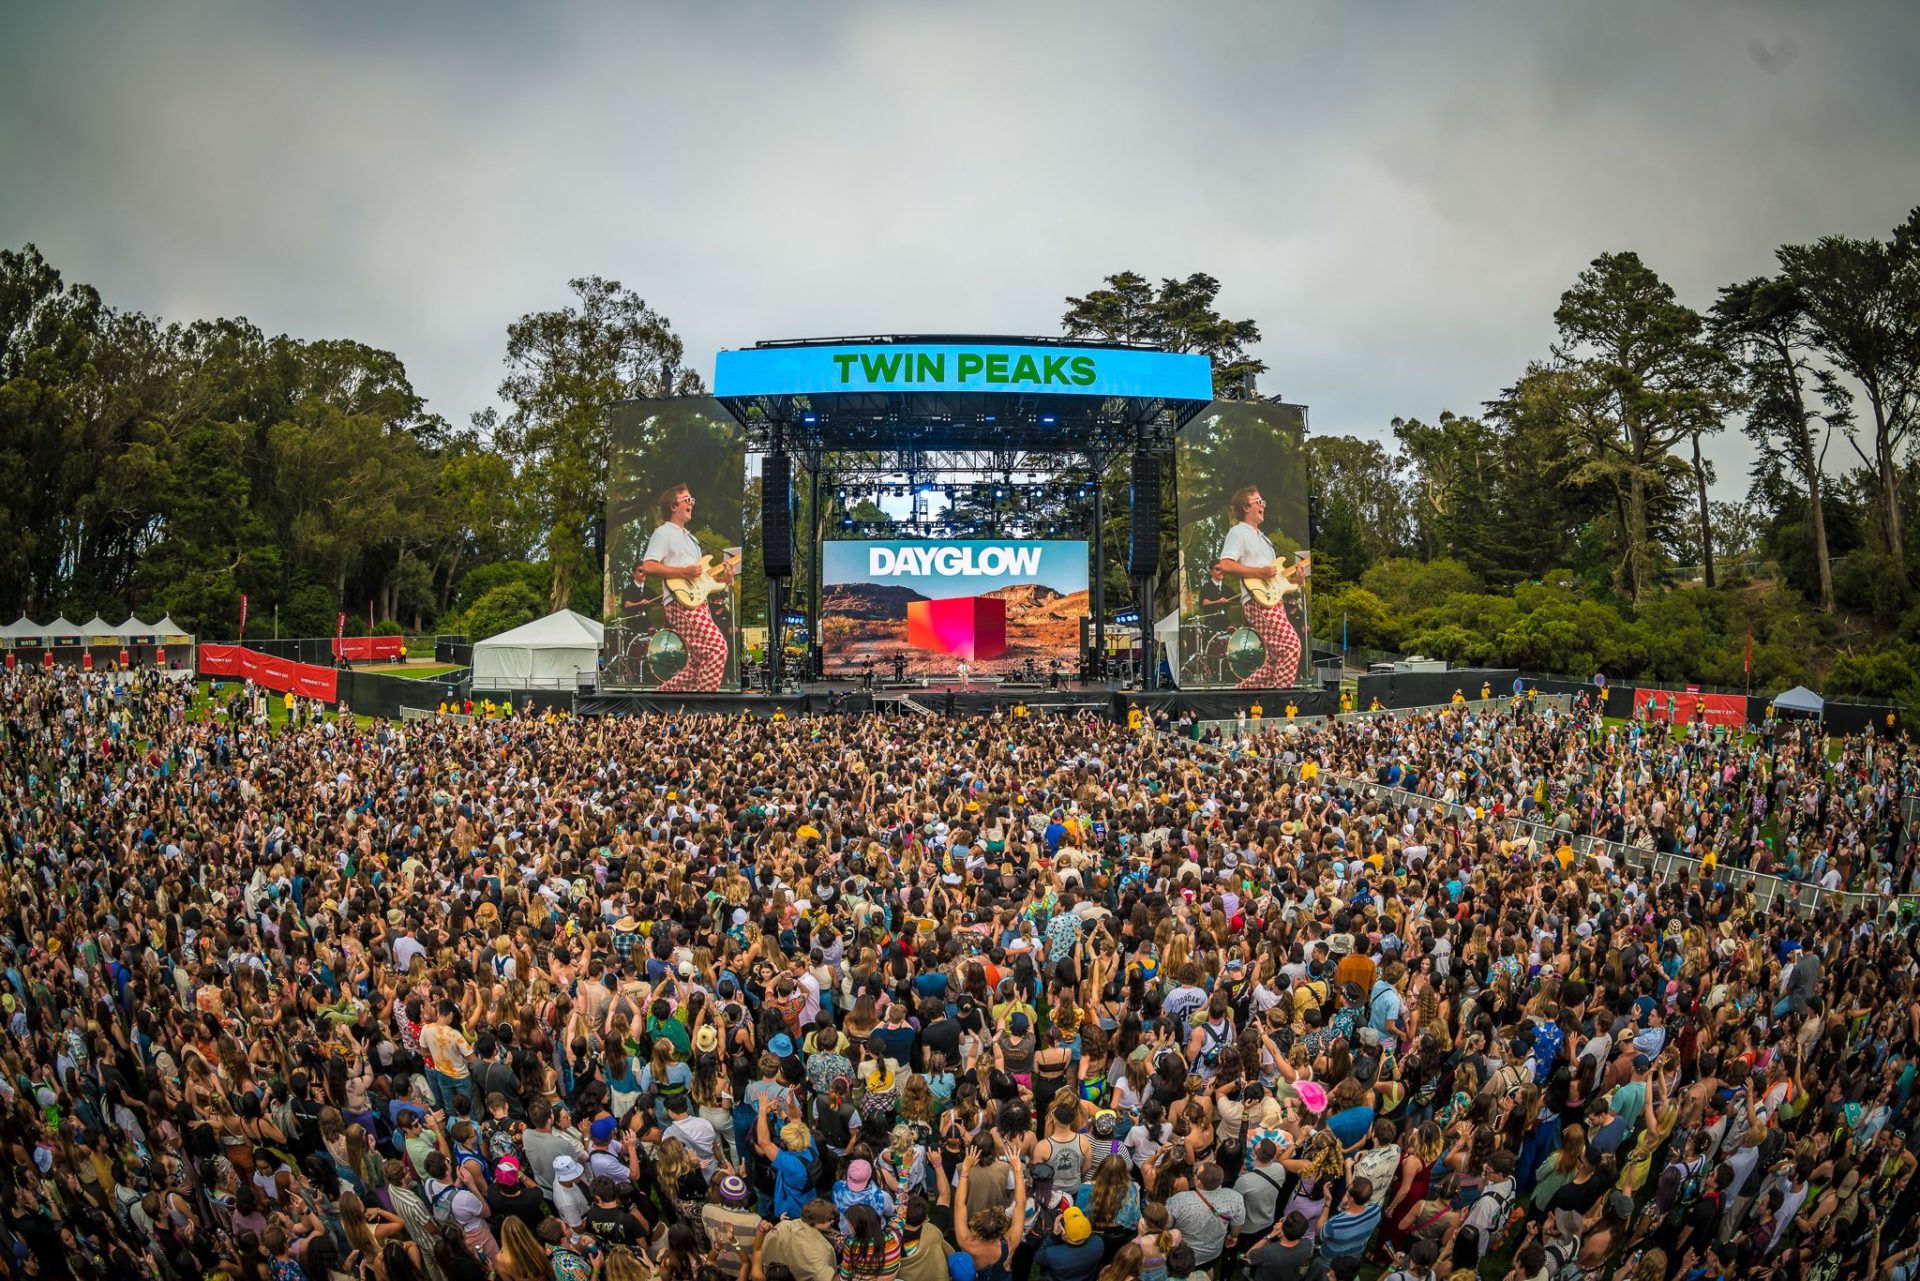 Photo of crowd watching Dayglow perform at the Twin Peaks stage at Outside Lands 2022